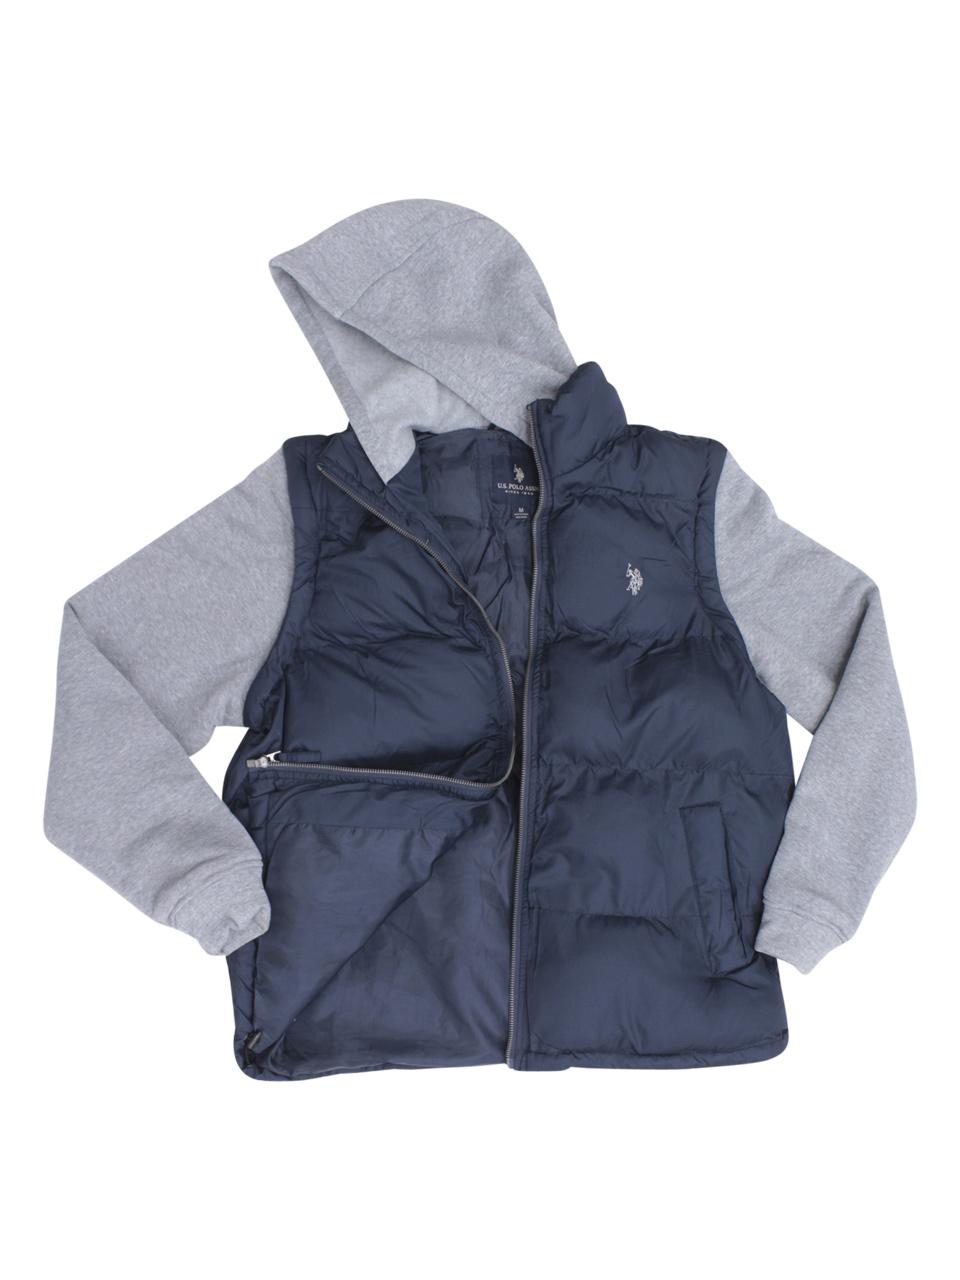 polo vest with hoodie